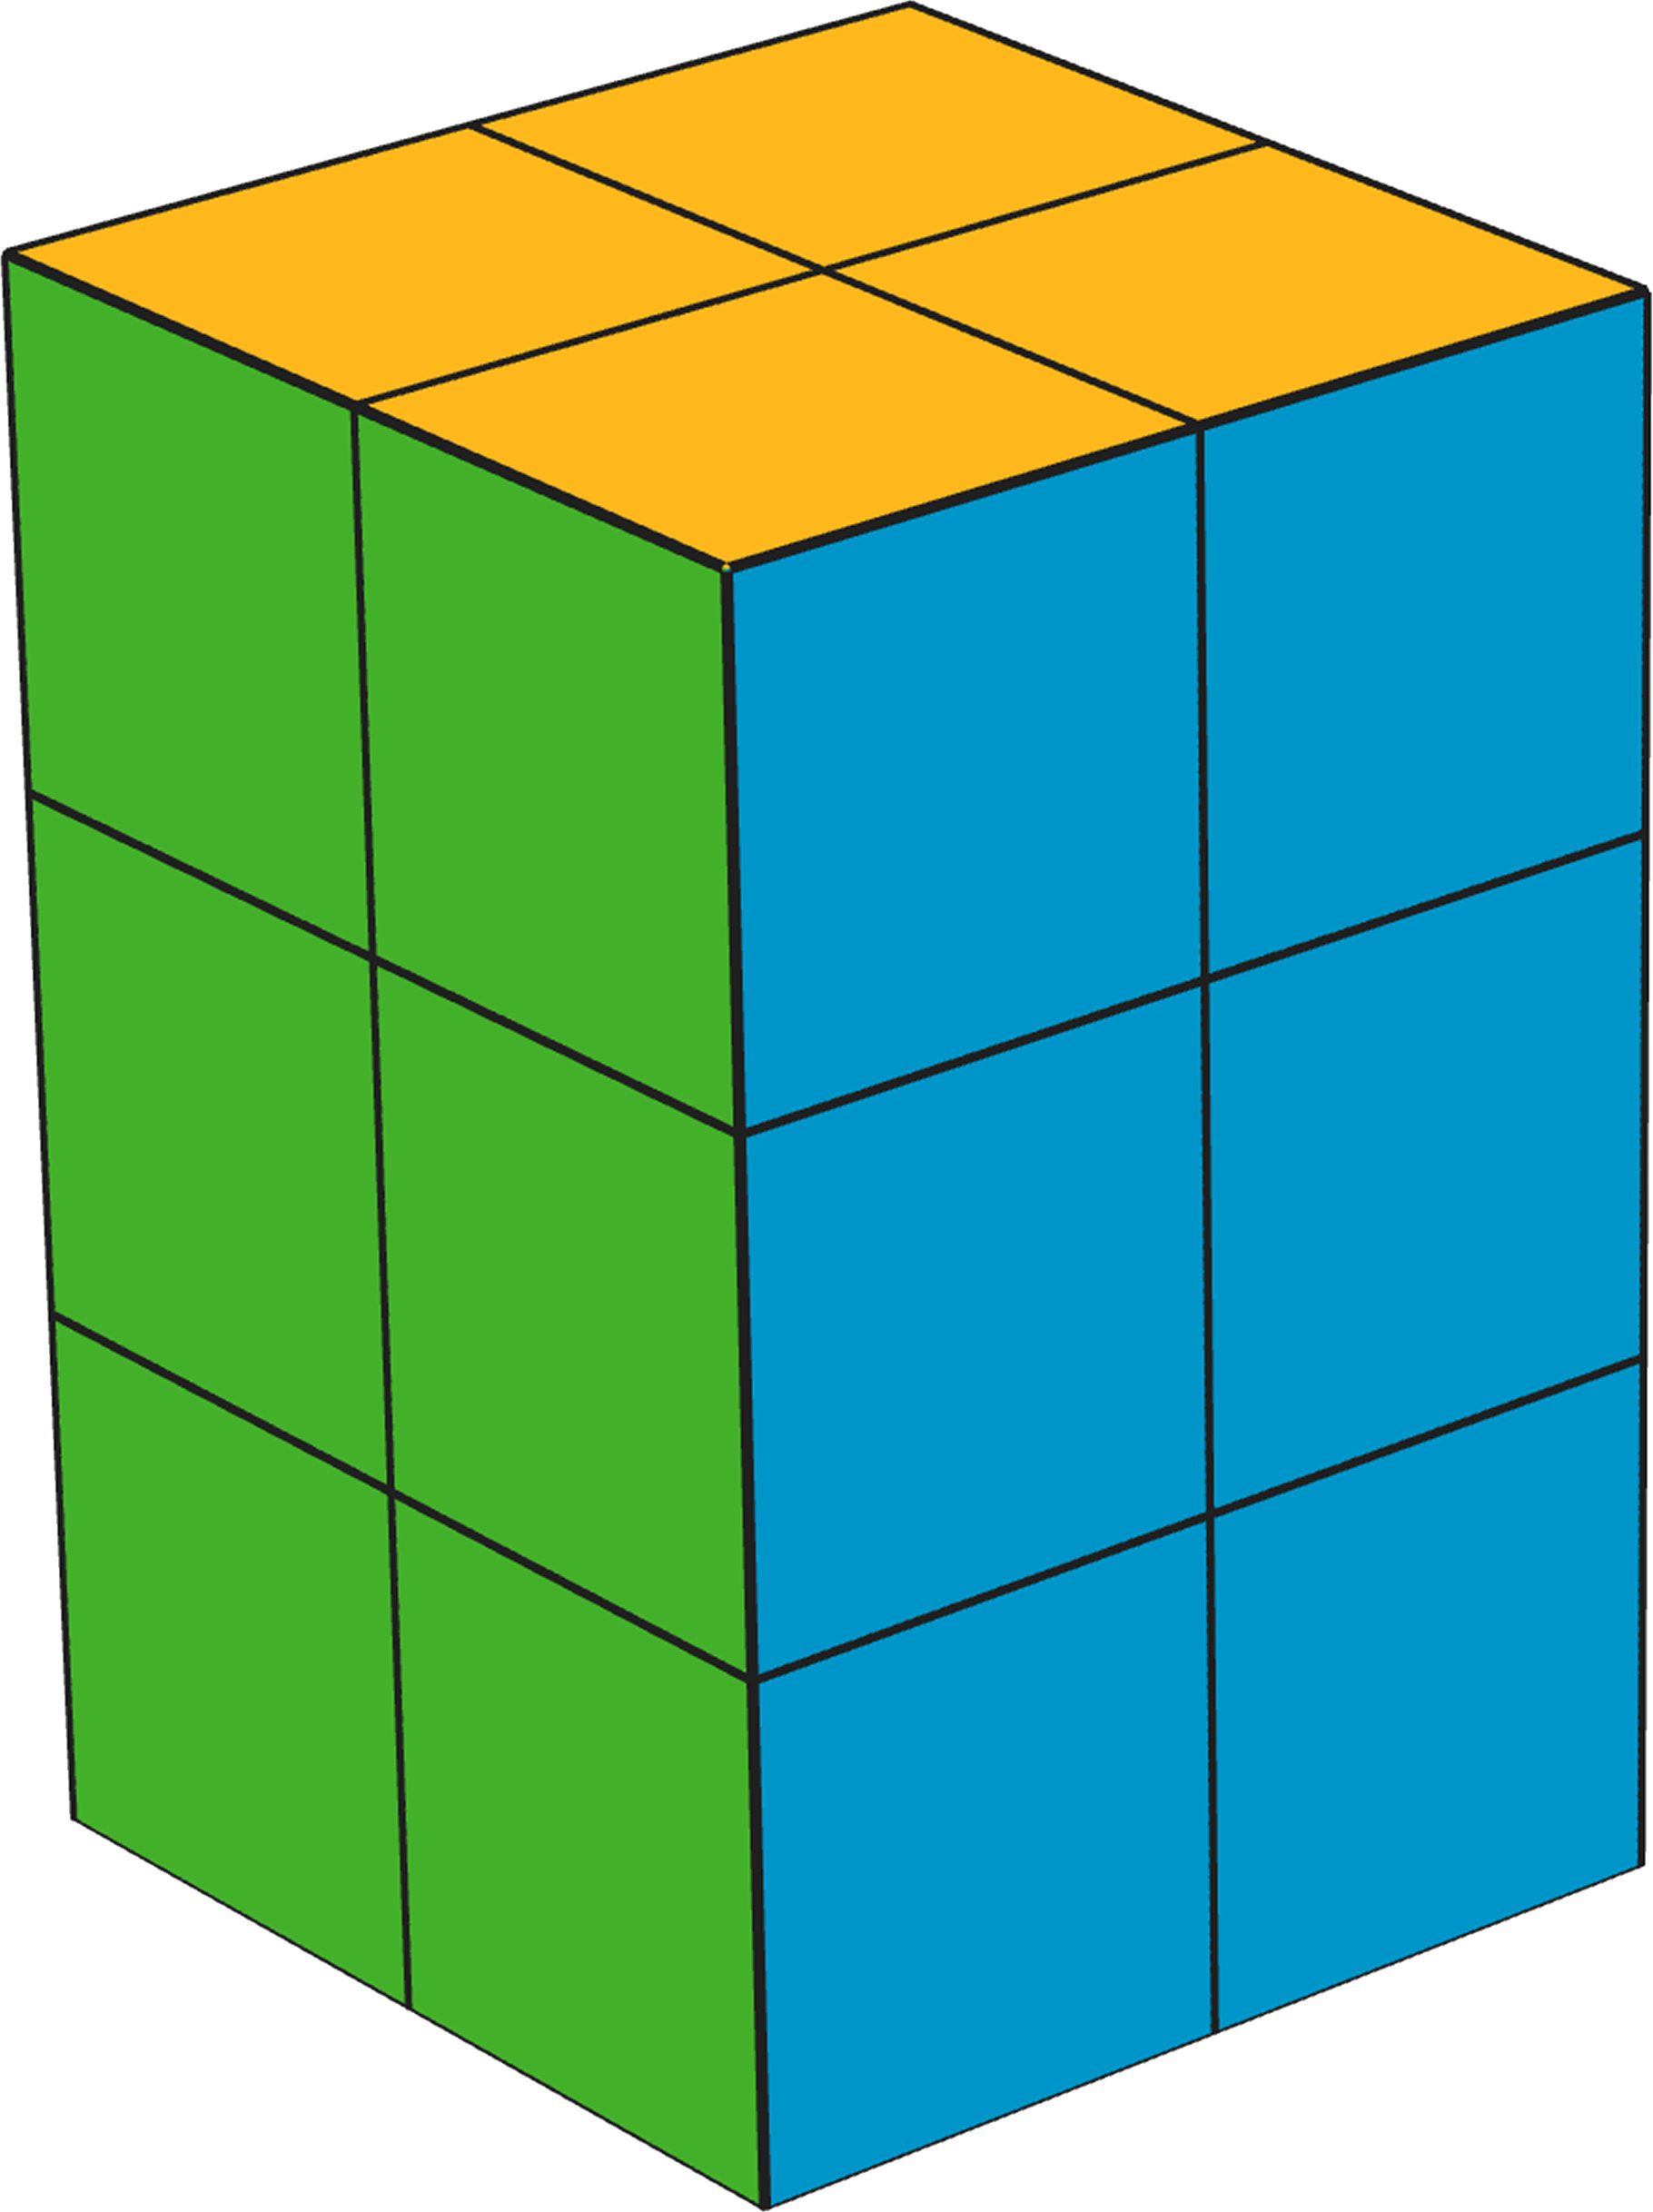 Building With Snap Cubes - Rectangular Prism With 12 Cubes (1820x2435)